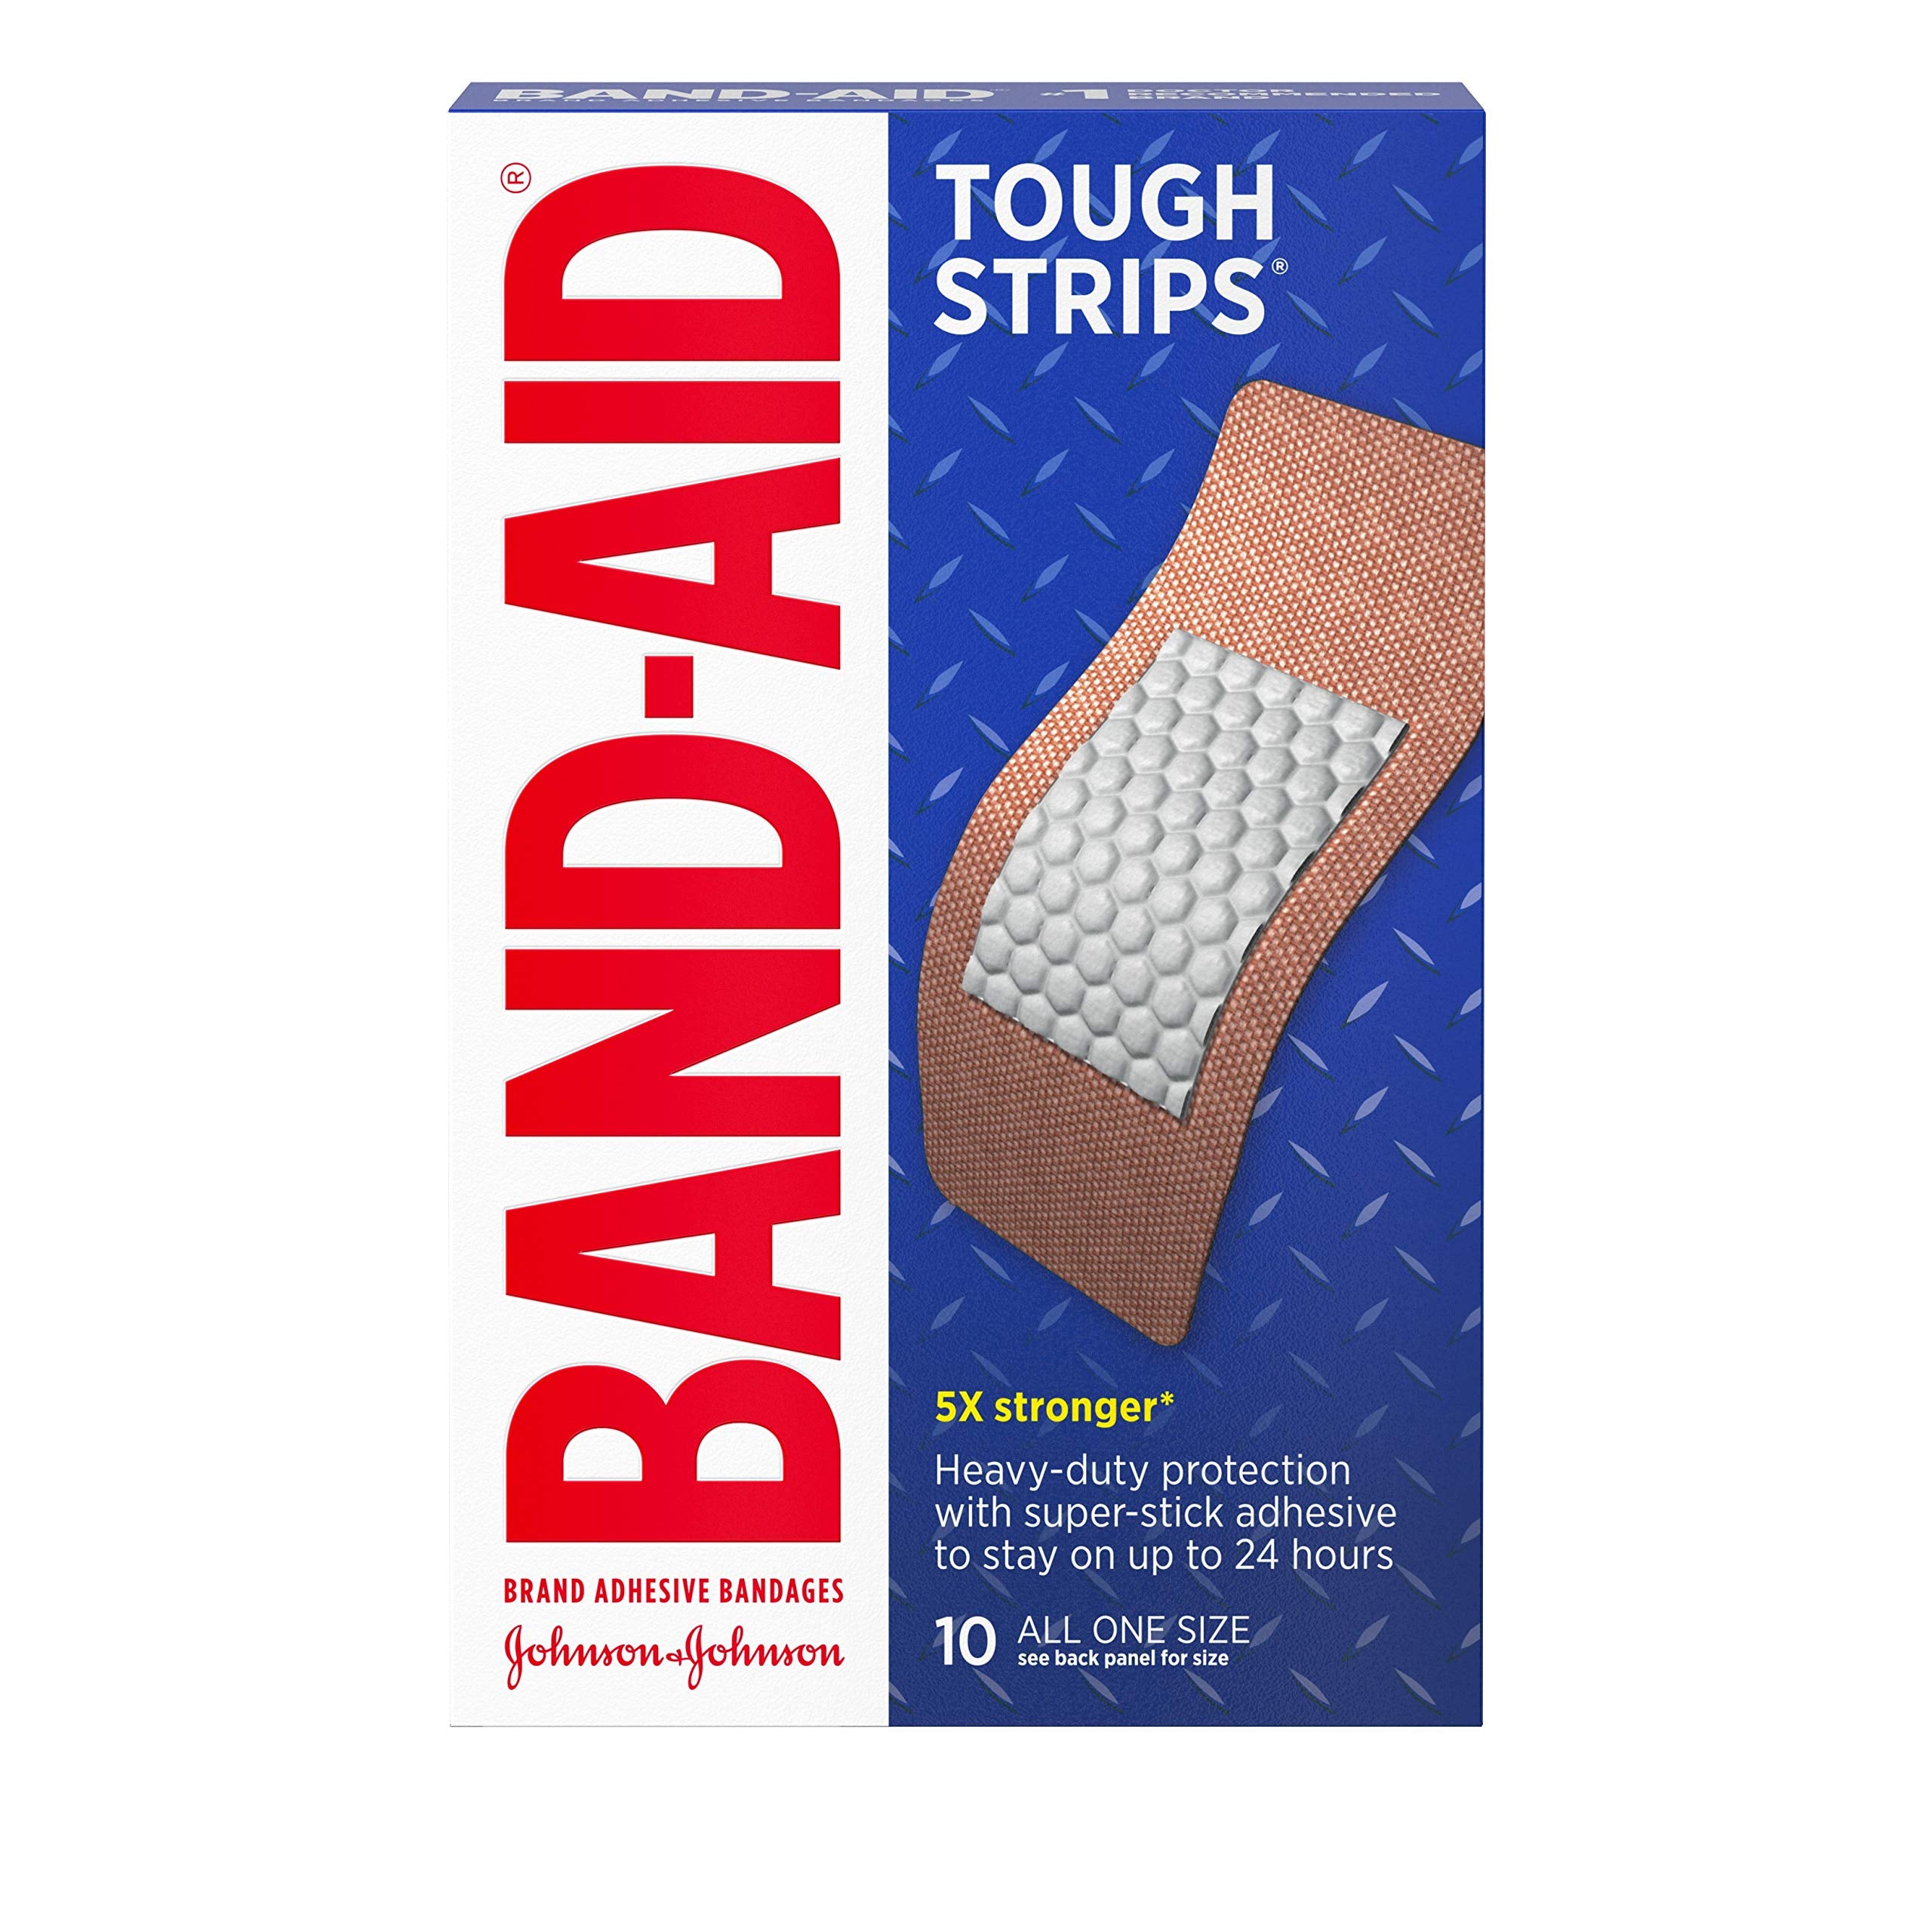 Band-Aid Brand Tough Strips Adhesive Bandages for Wound Care, Durable Protection for Minor Cuts and Scrapes, Extra Large Size, 10 ct